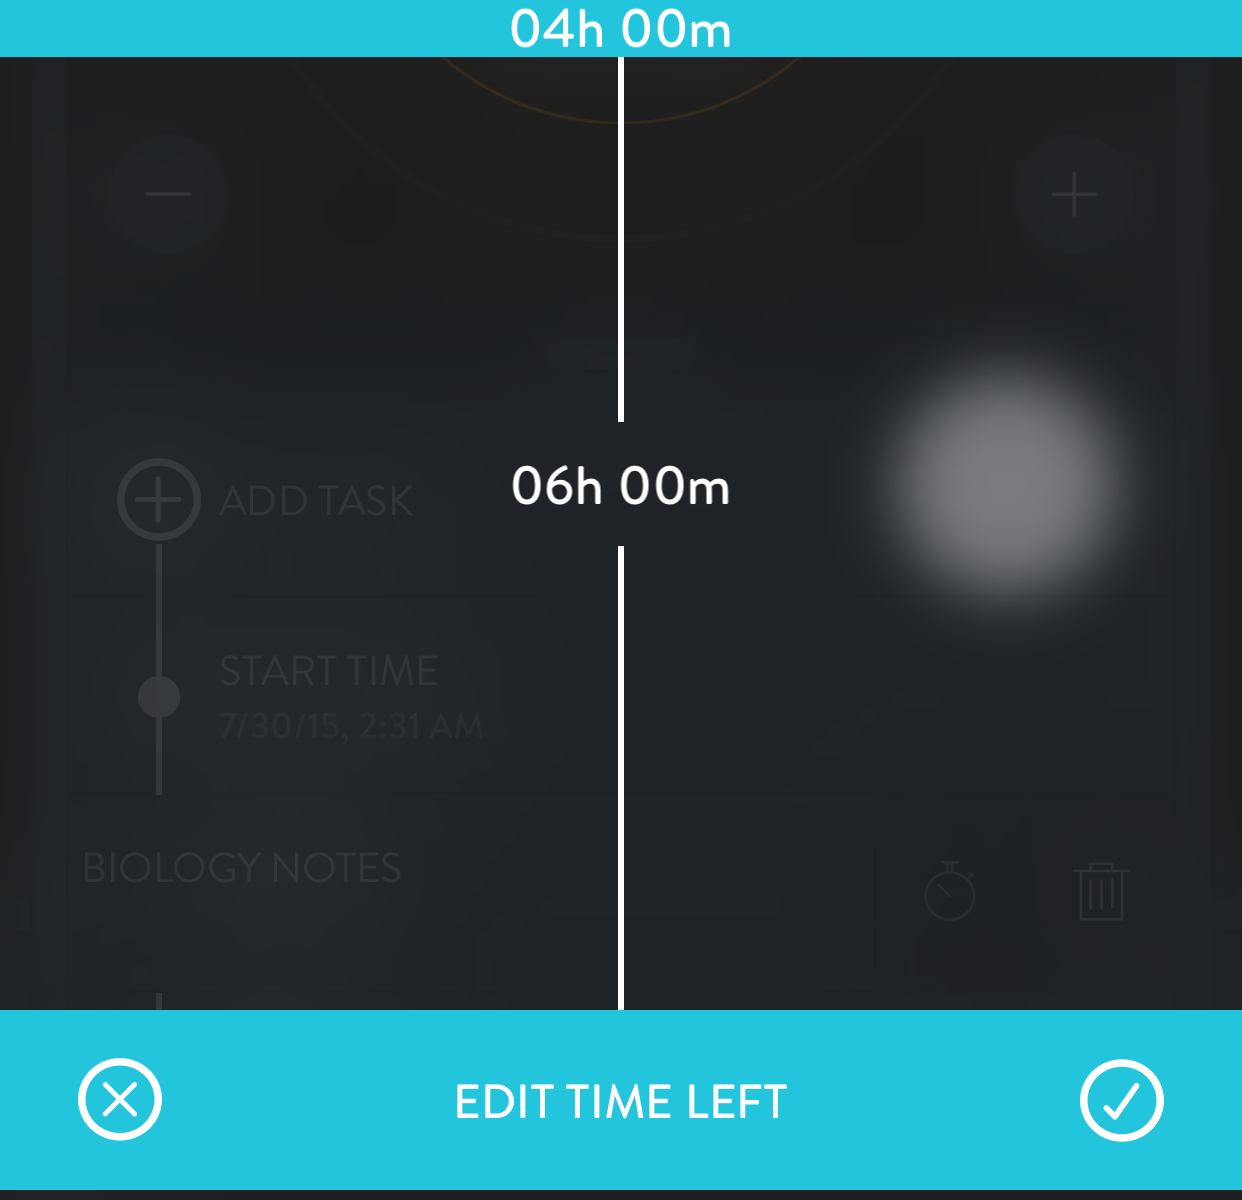 Feature: Time Slider